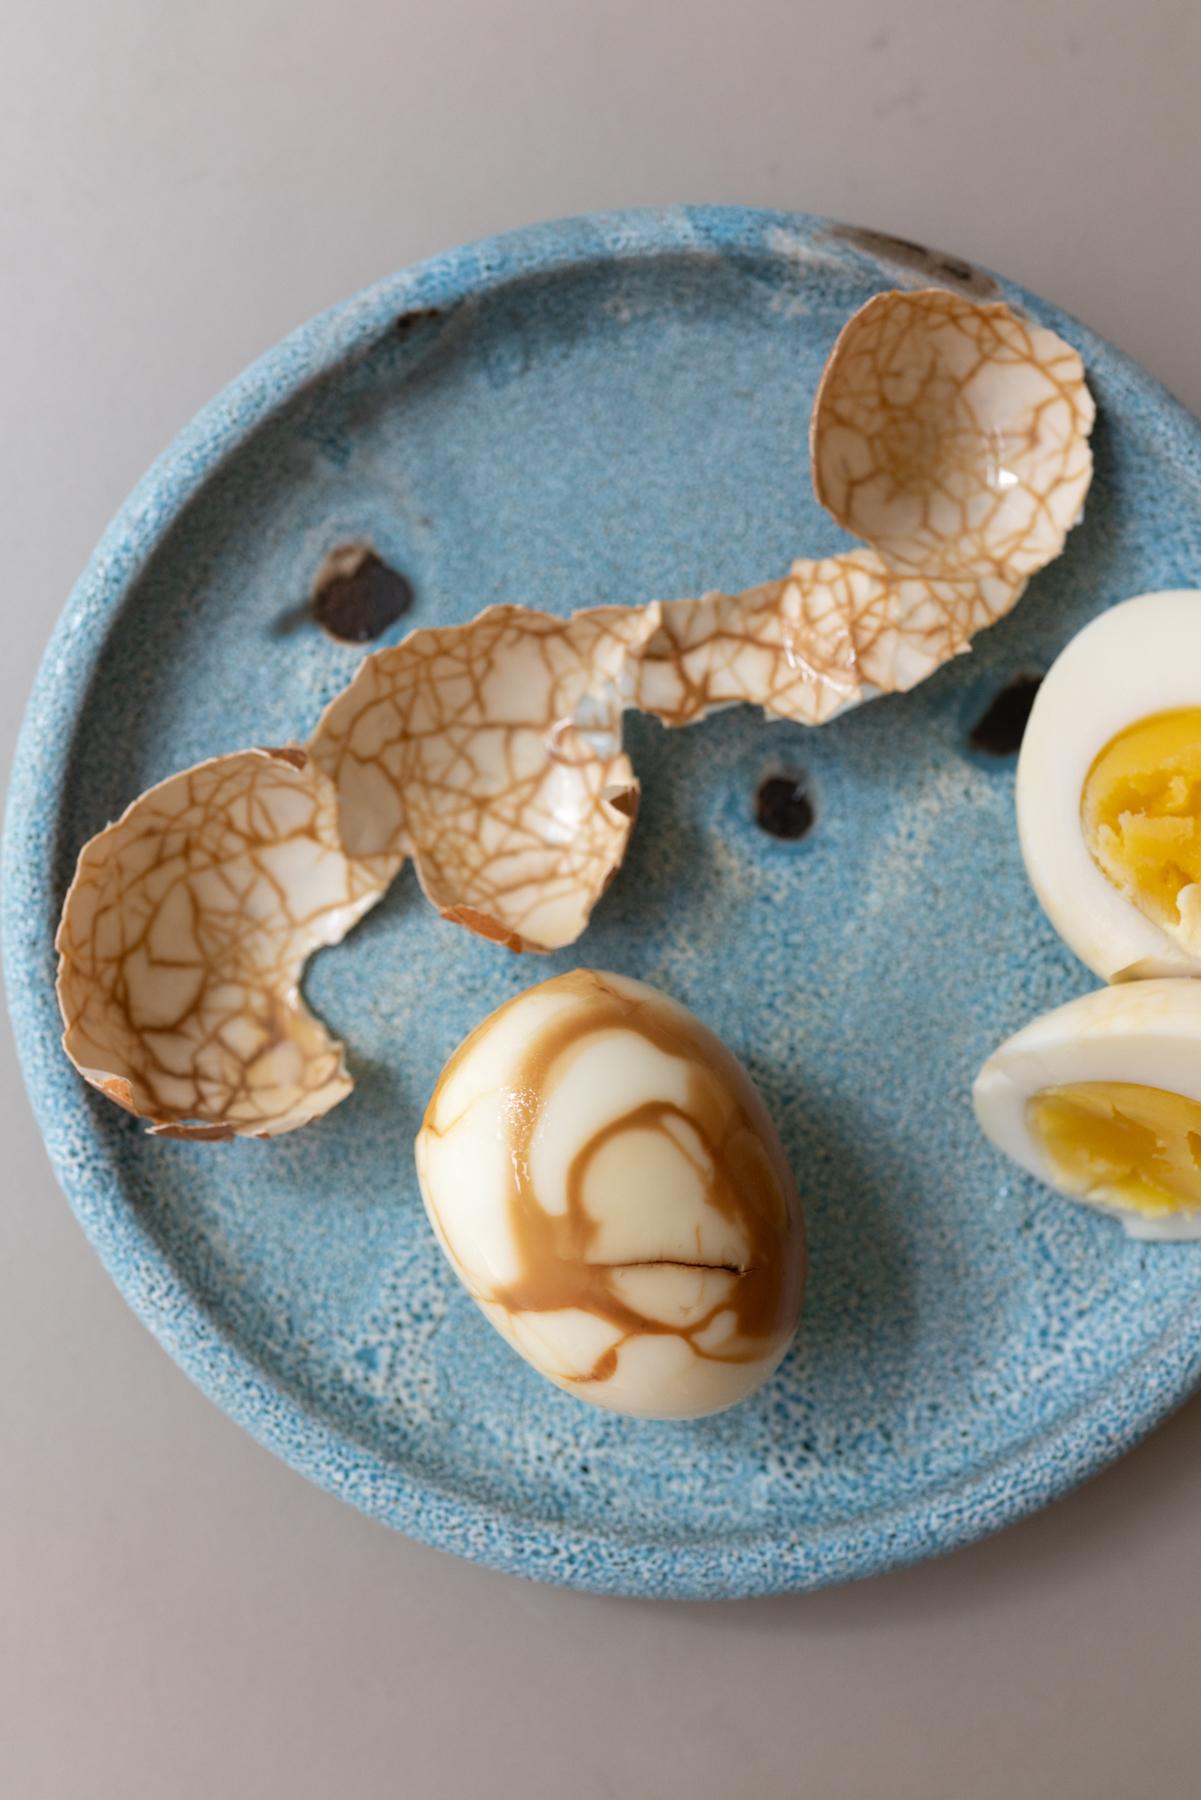 Chinese tea eggs on a plate, ready to eat